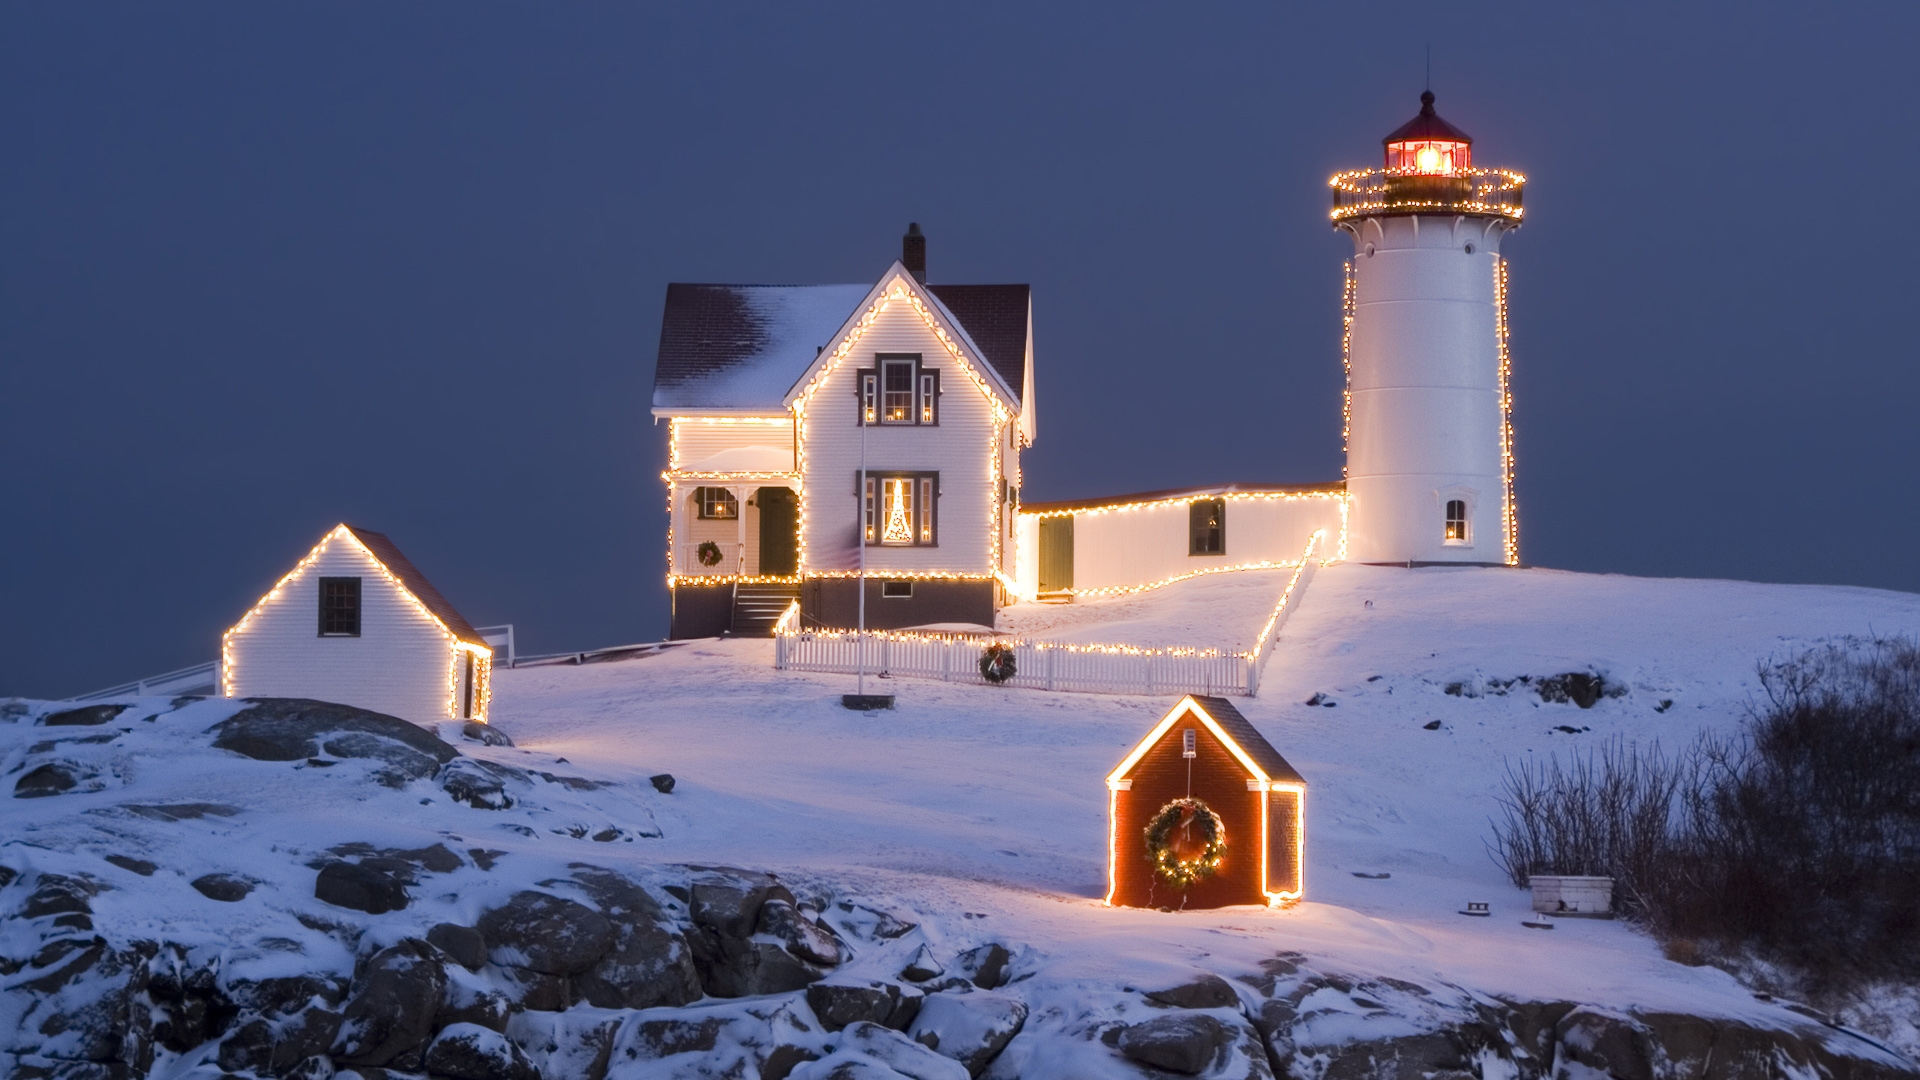 Winter scene with a lighthouse amid snow and Christmas lights